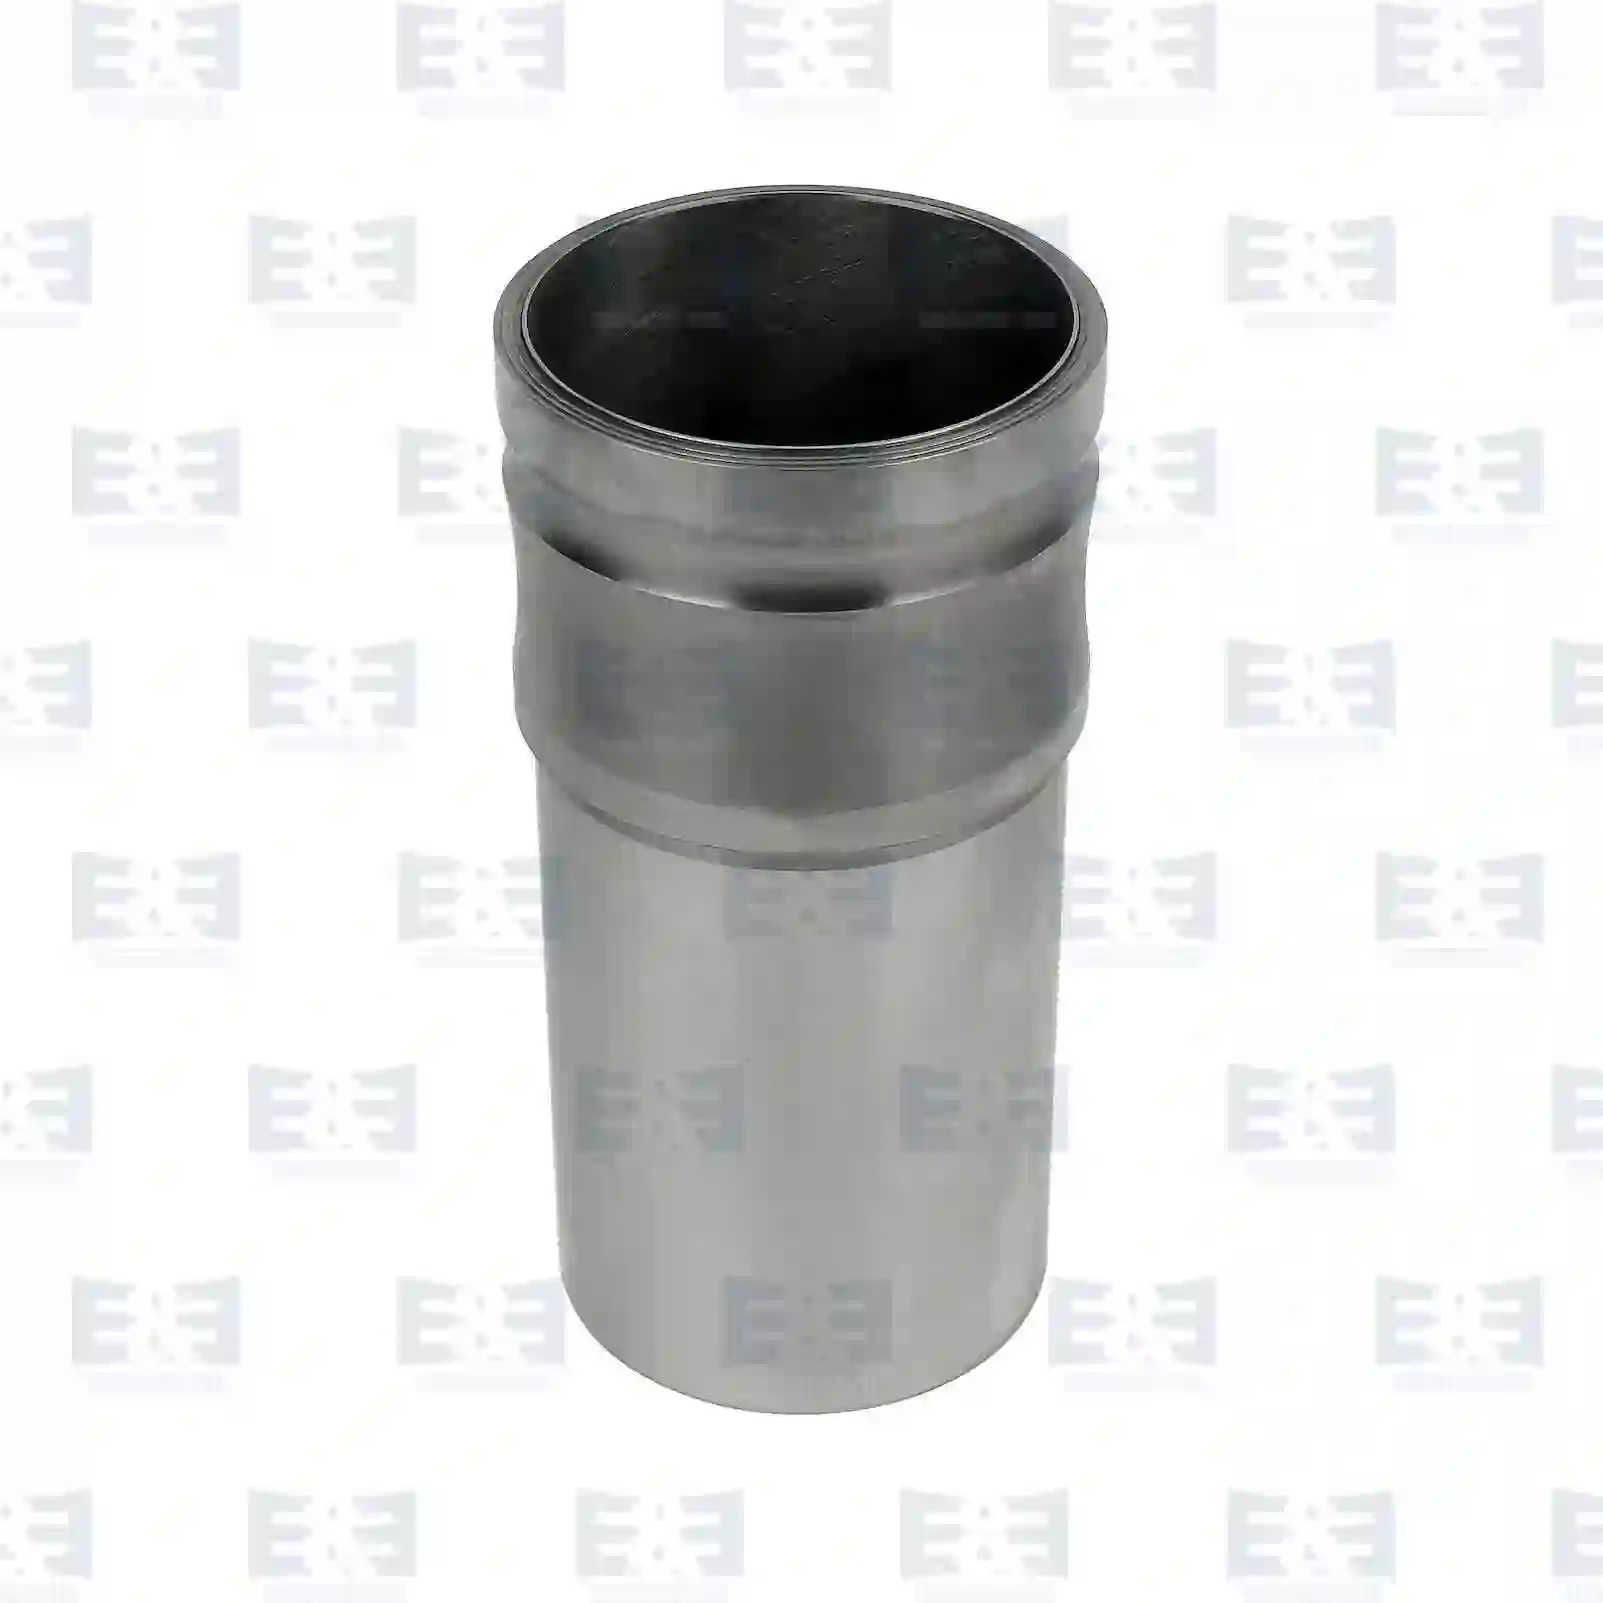 Cylinder liner, without seal rings, 2E2207700, 5010284447, , , ||  2E2207700 E&E Truck Spare Parts | Truck Spare Parts, Auotomotive Spare Parts Cylinder liner, without seal rings, 2E2207700, 5010284447, , , ||  2E2207700 E&E Truck Spare Parts | Truck Spare Parts, Auotomotive Spare Parts